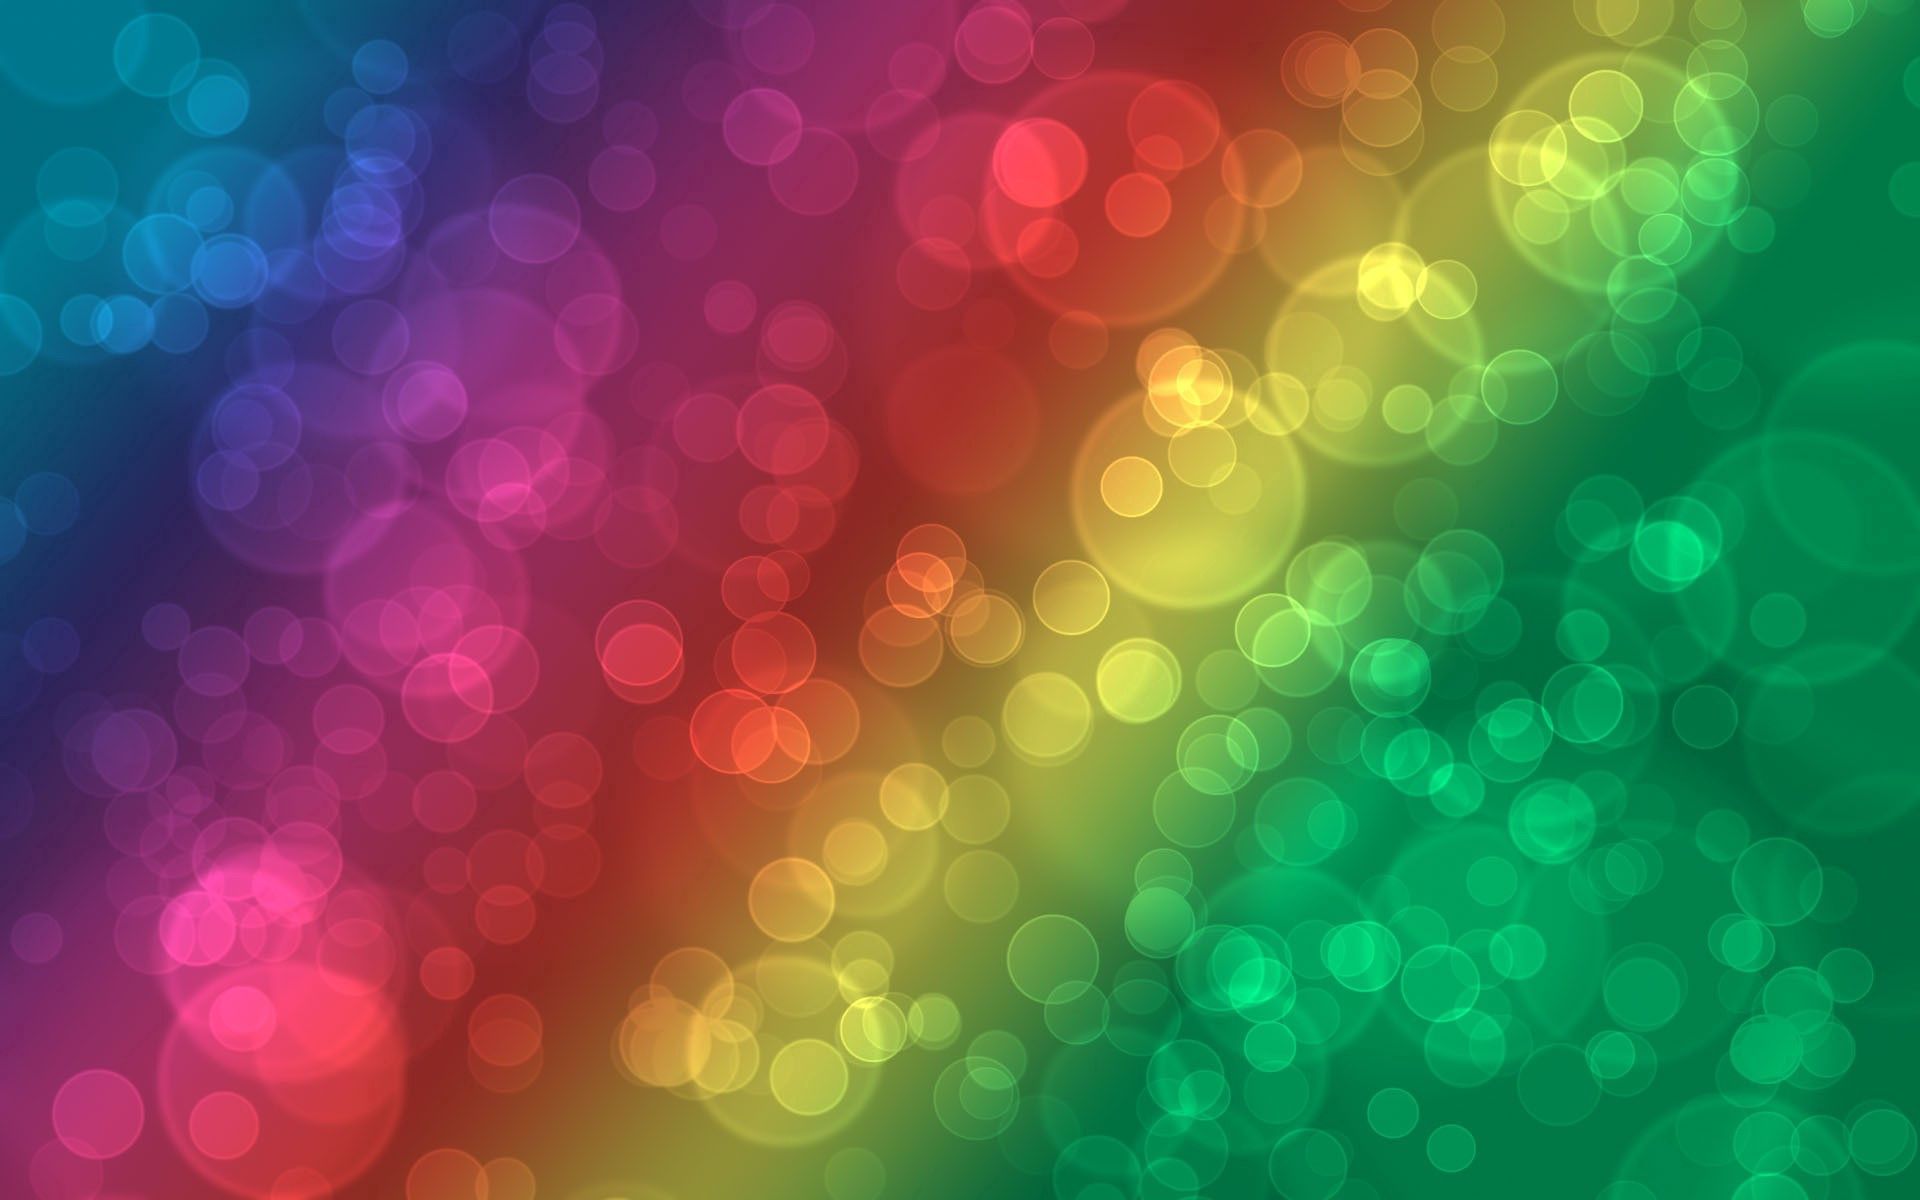 New Lock Screen Wallpapers abstract, background, glare, circles, multicolored, motley